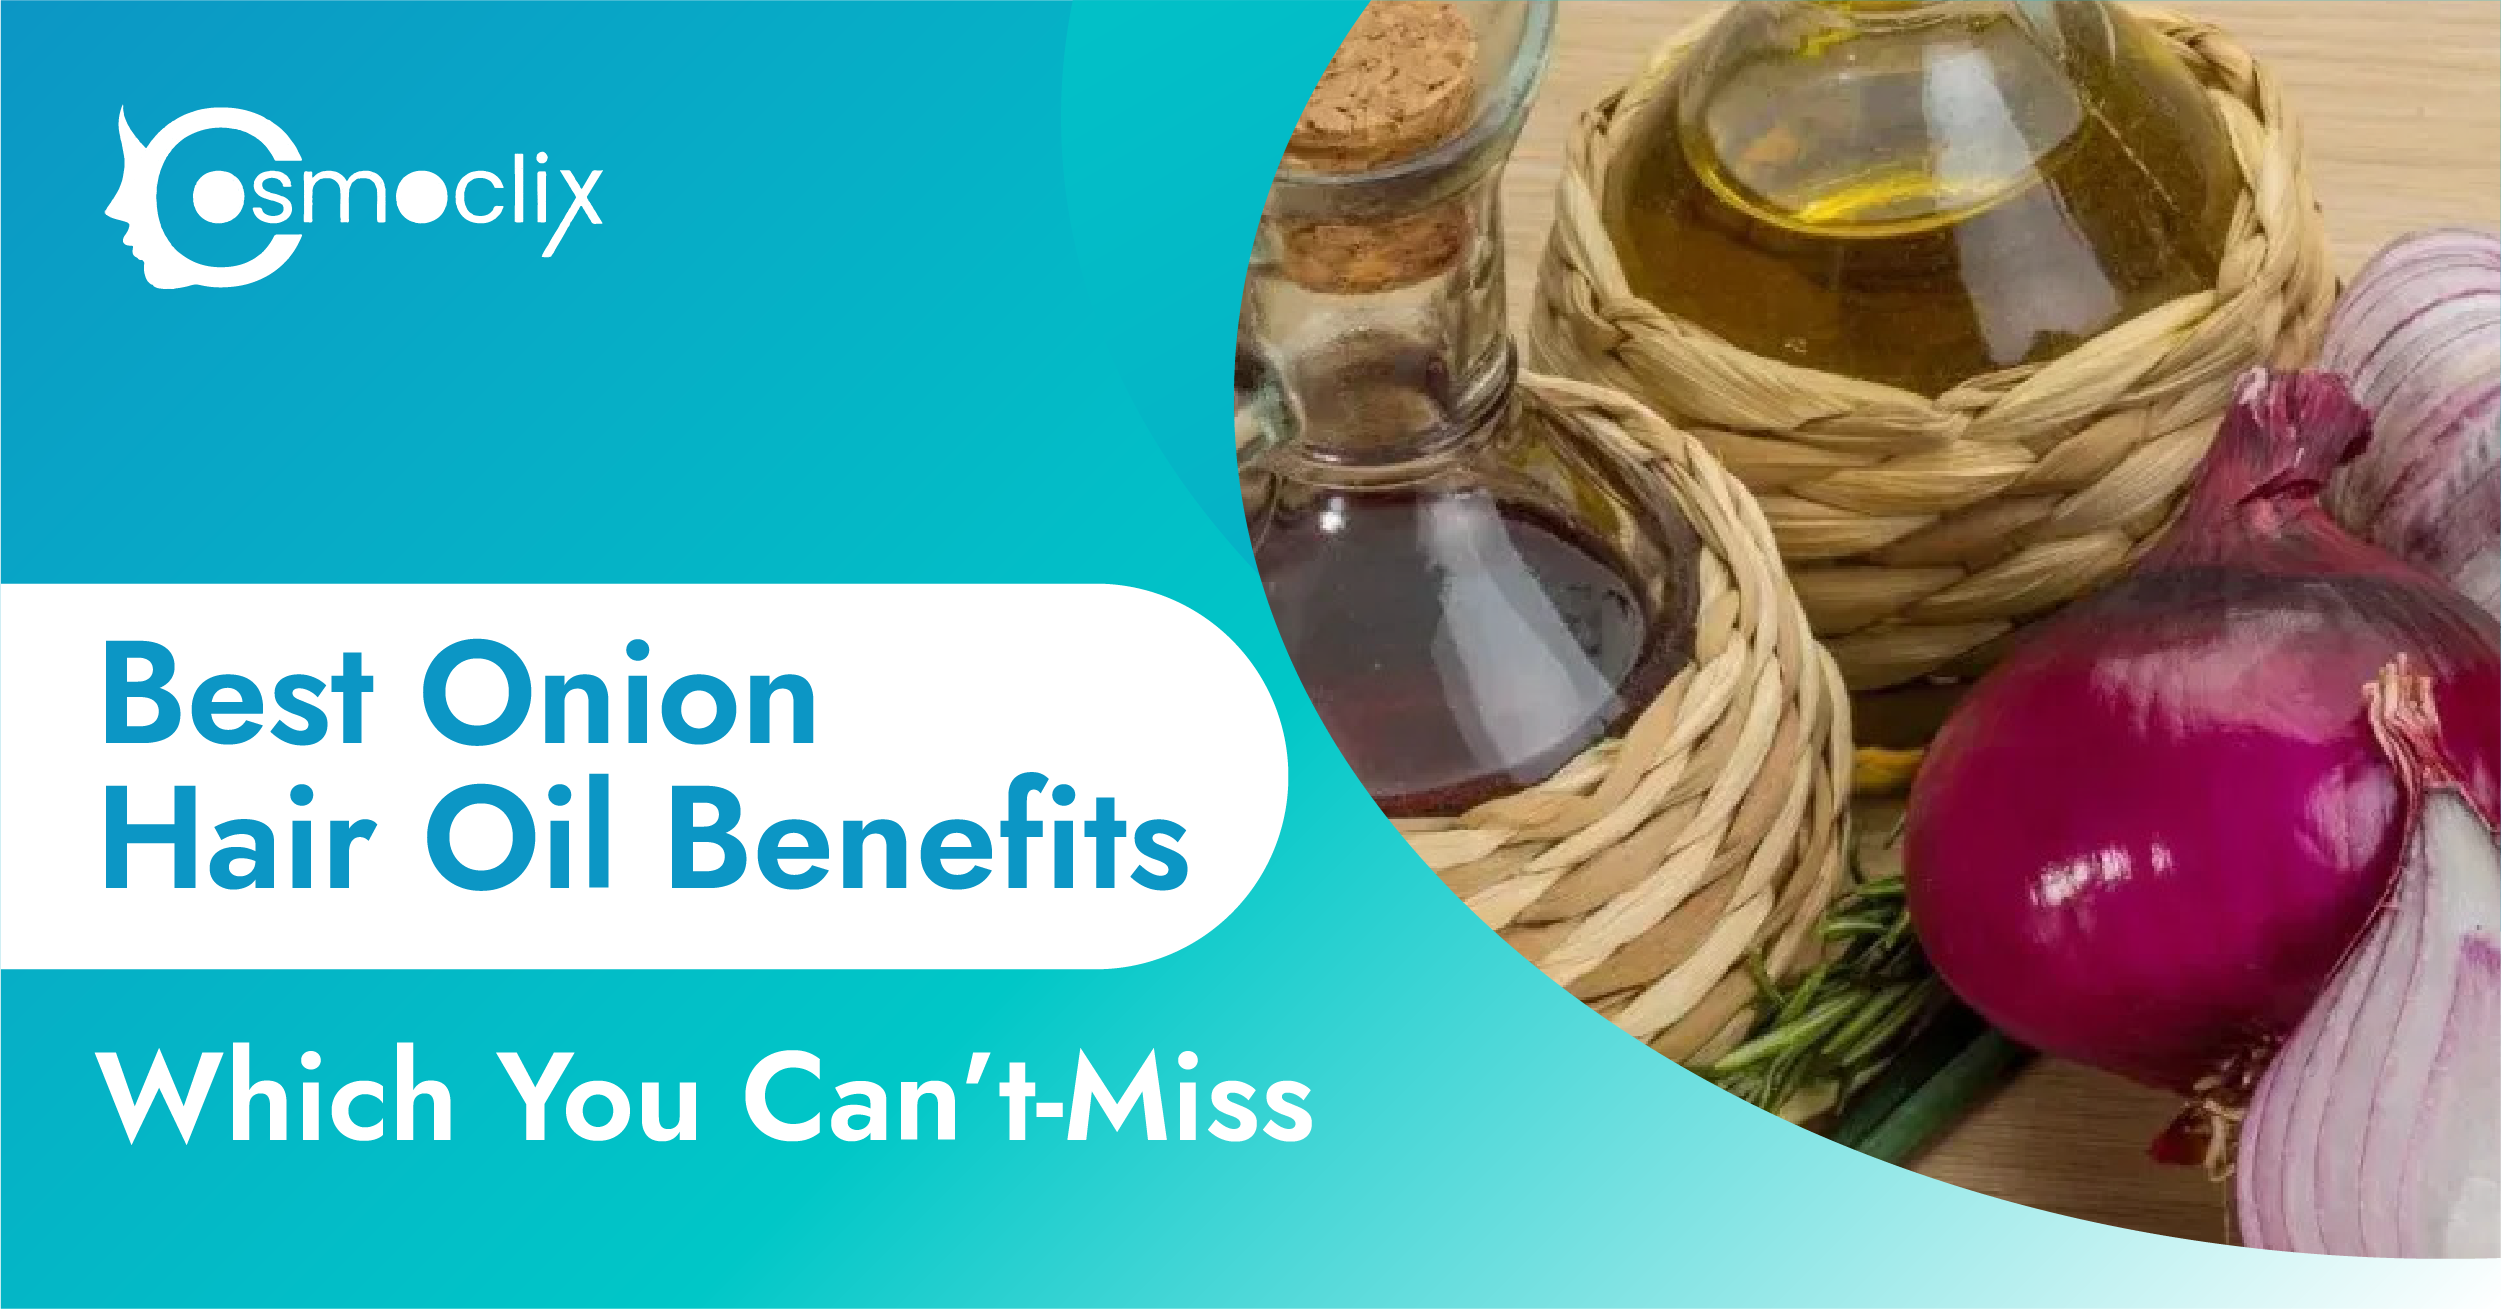 Buy Wow - What Are The Benefits Of Onion Hair Oil?